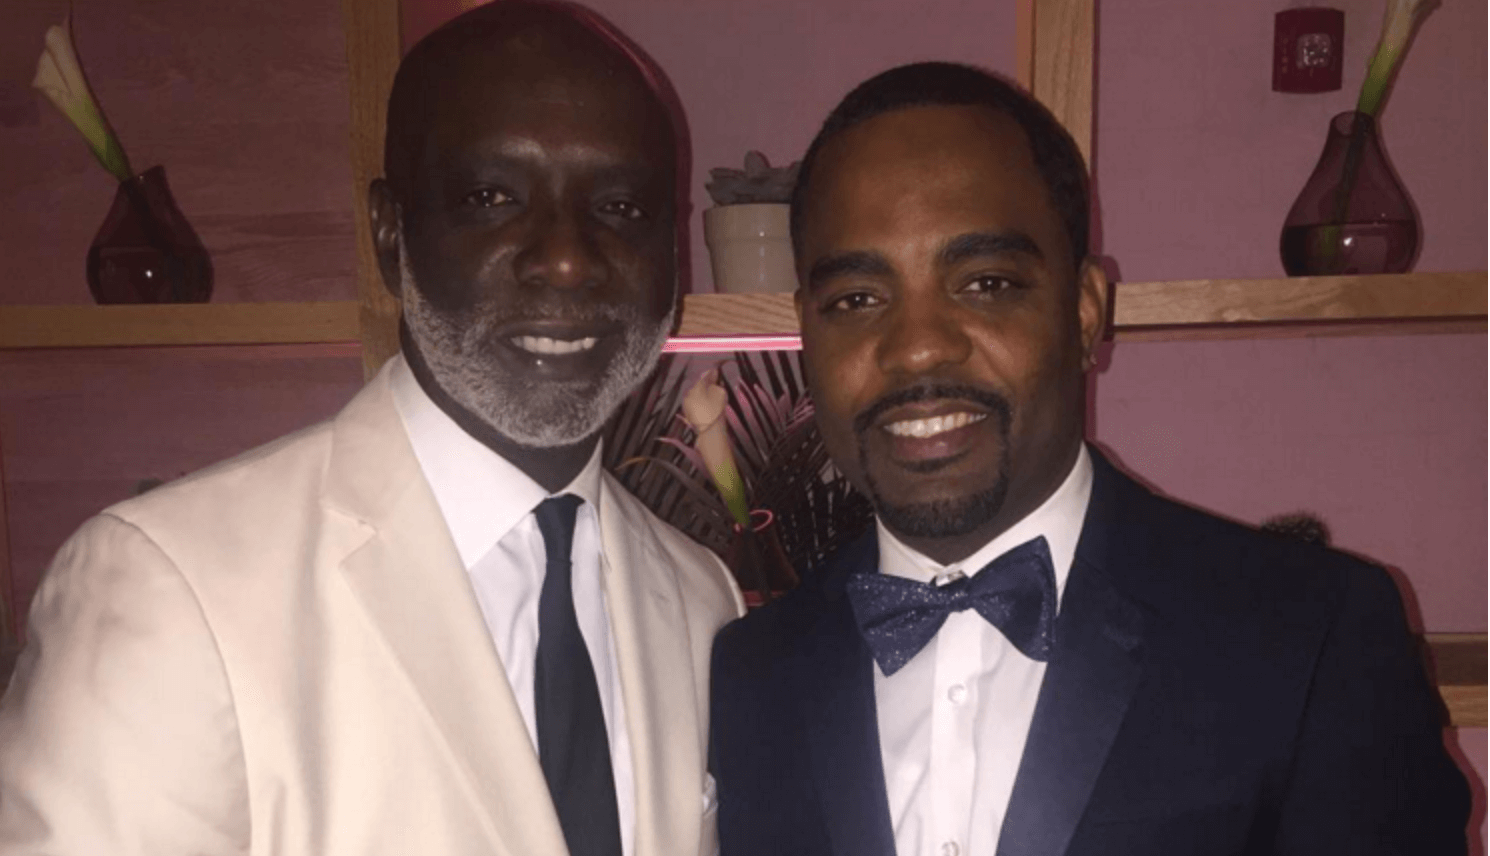 RHOA’s Peter Thomas & Todd Tucker Nearly Come to Blows!